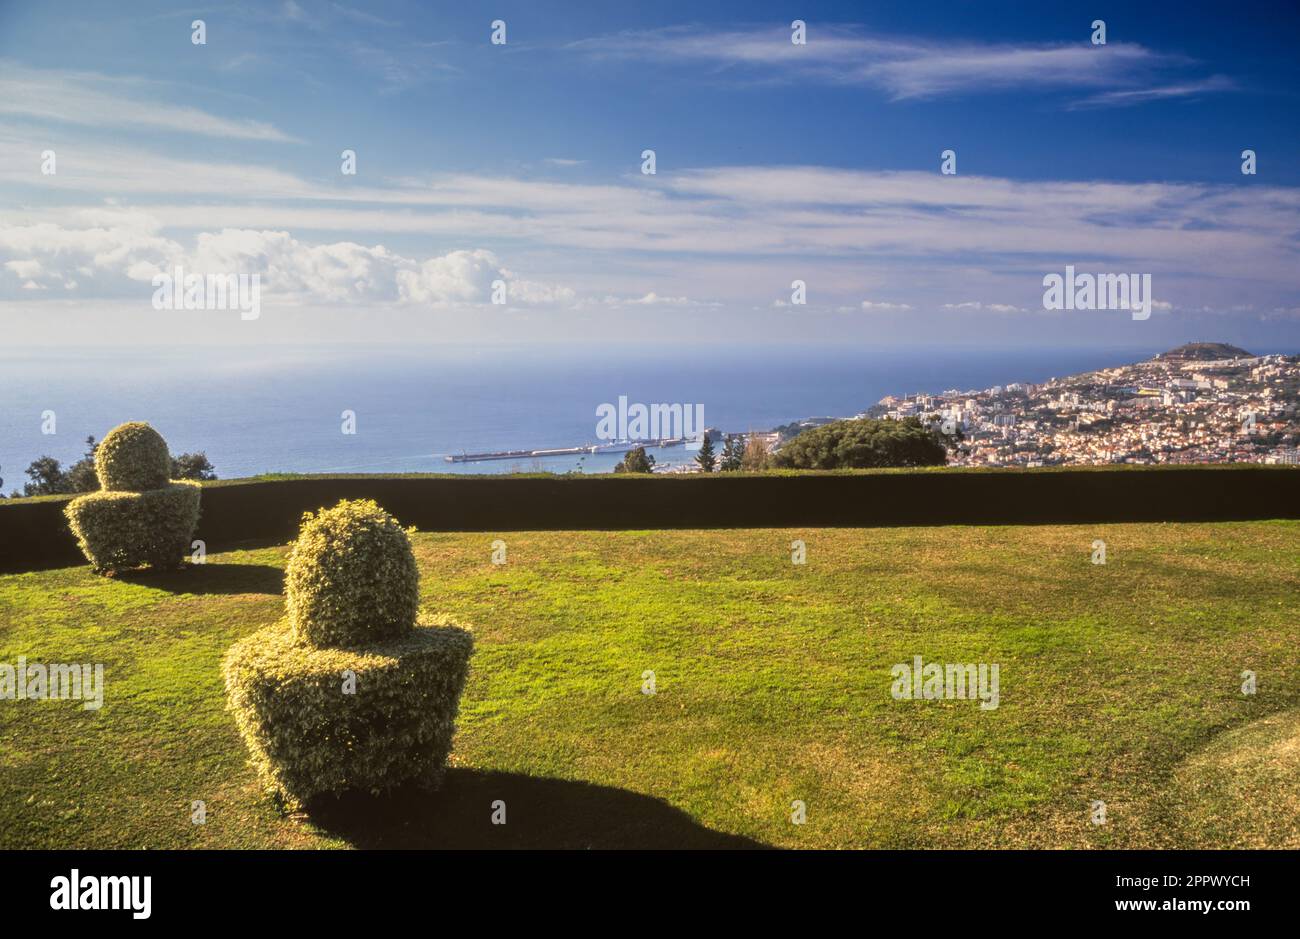 Archive image of topiary in Madeira Botanical Garden, with the Atlantic ocean and the town of Funchal in the distance. Stock Photo